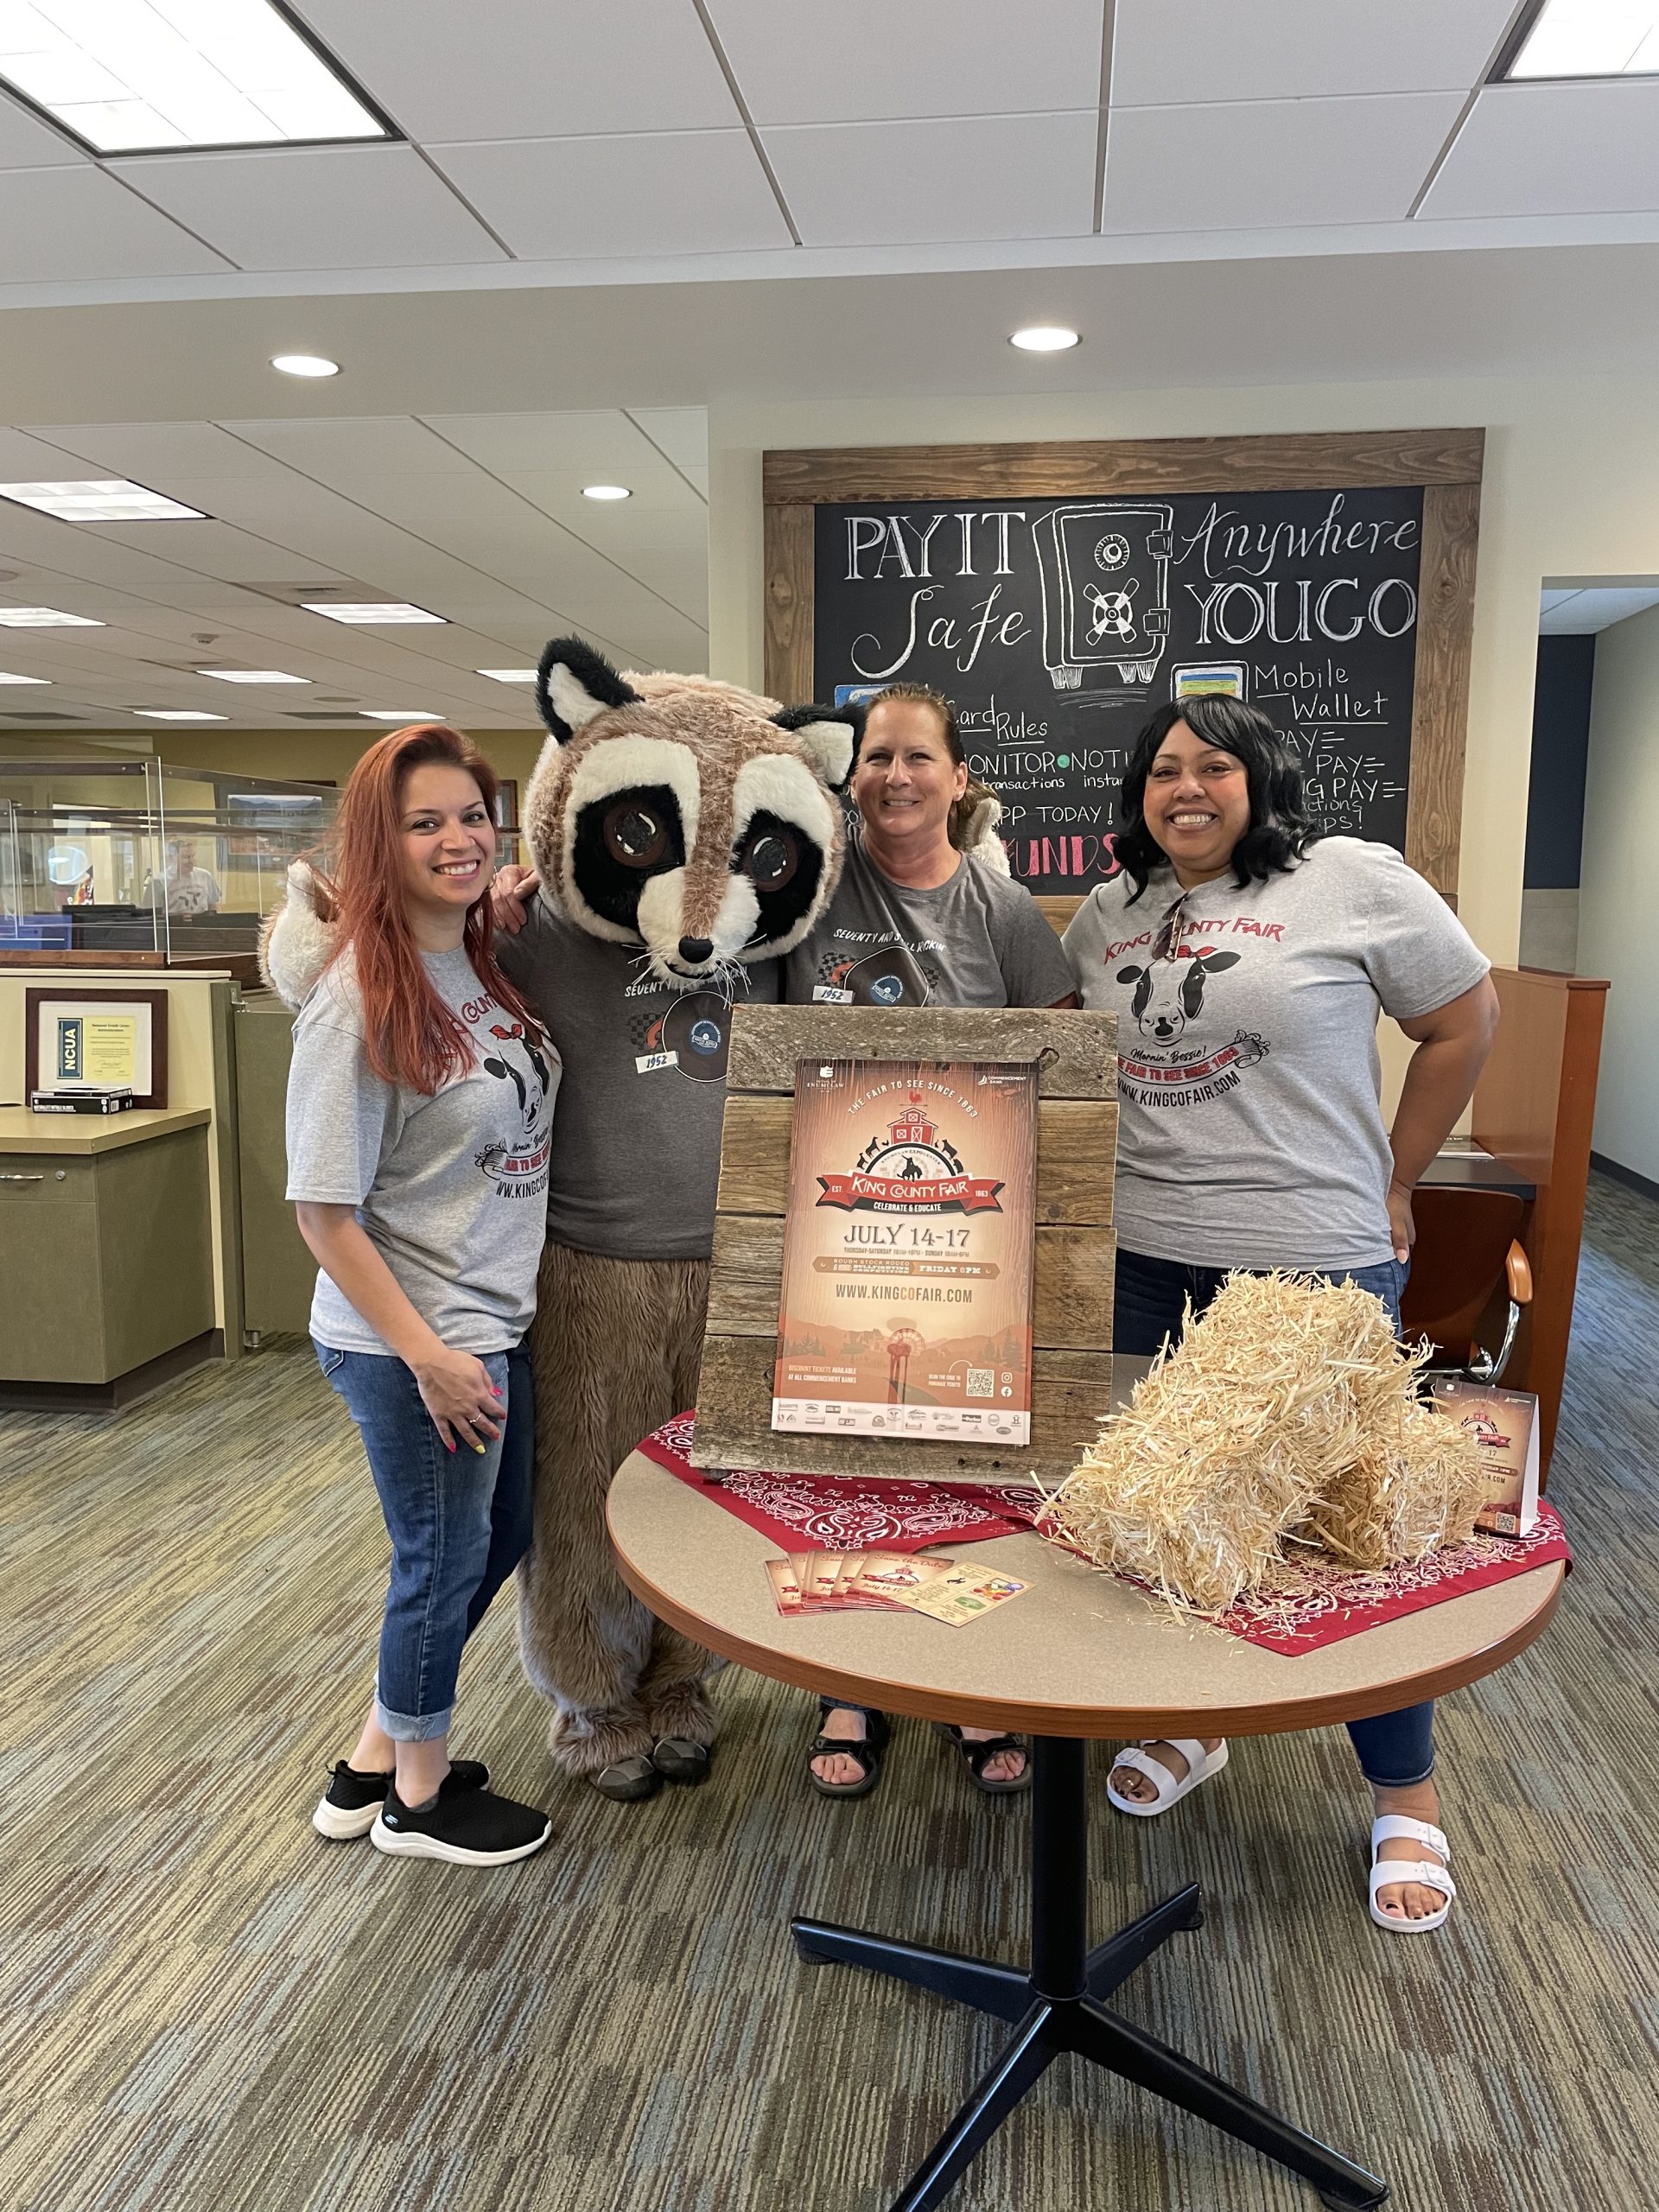 wrcu team and Rocky Raccoon hanging out in the lobby